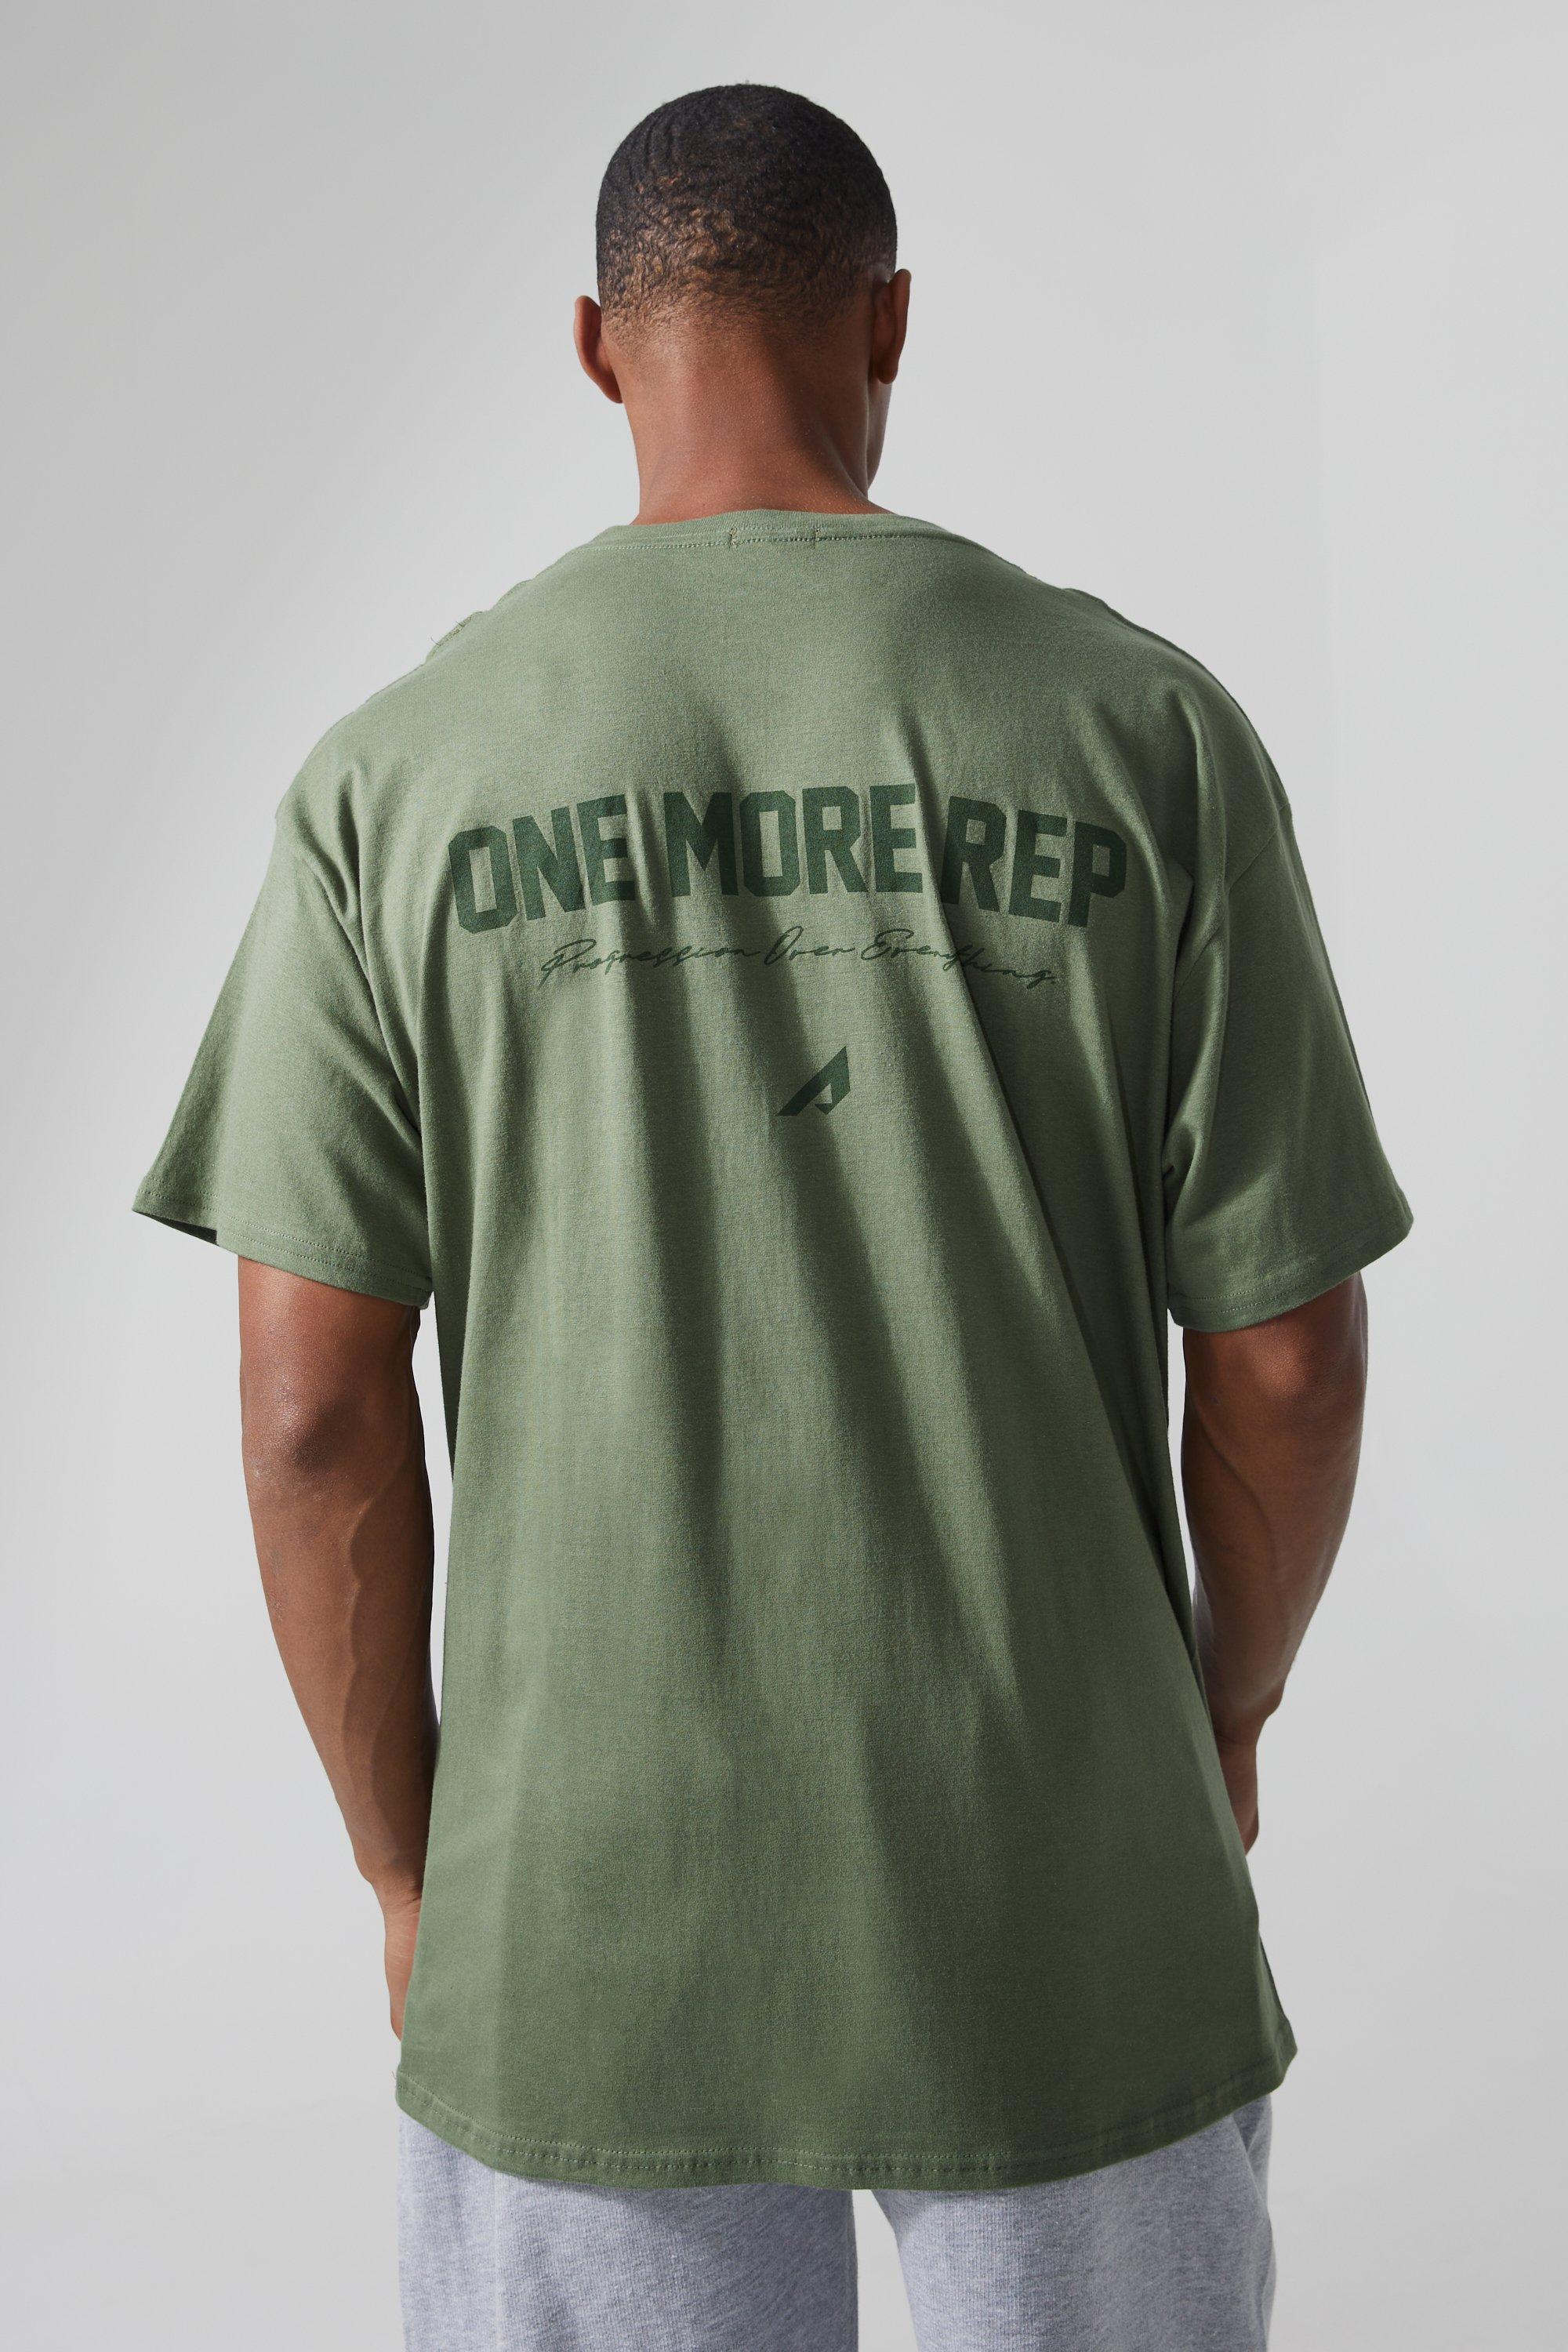 mens green active oversized one more rep t-shirt, green